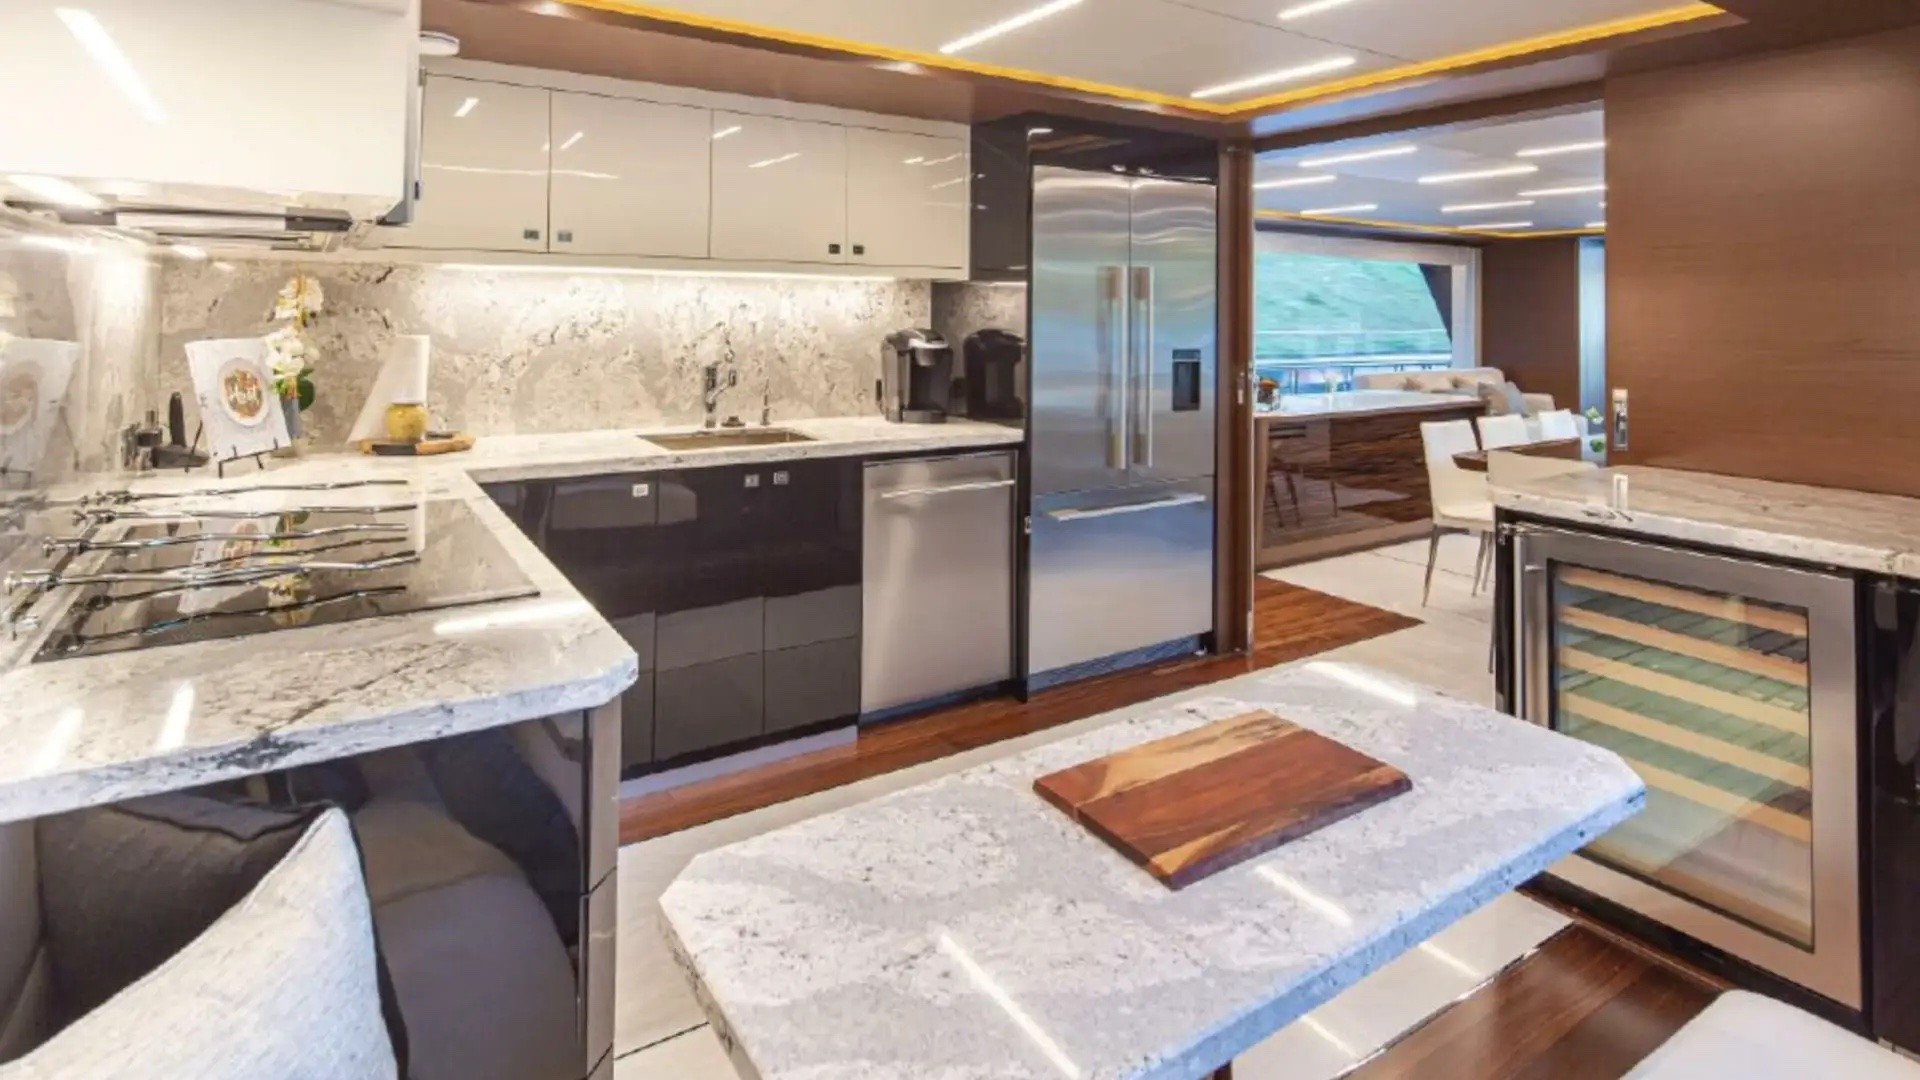 the golden standard for comfort and peace can be found in the 8 million tlc yacht 17